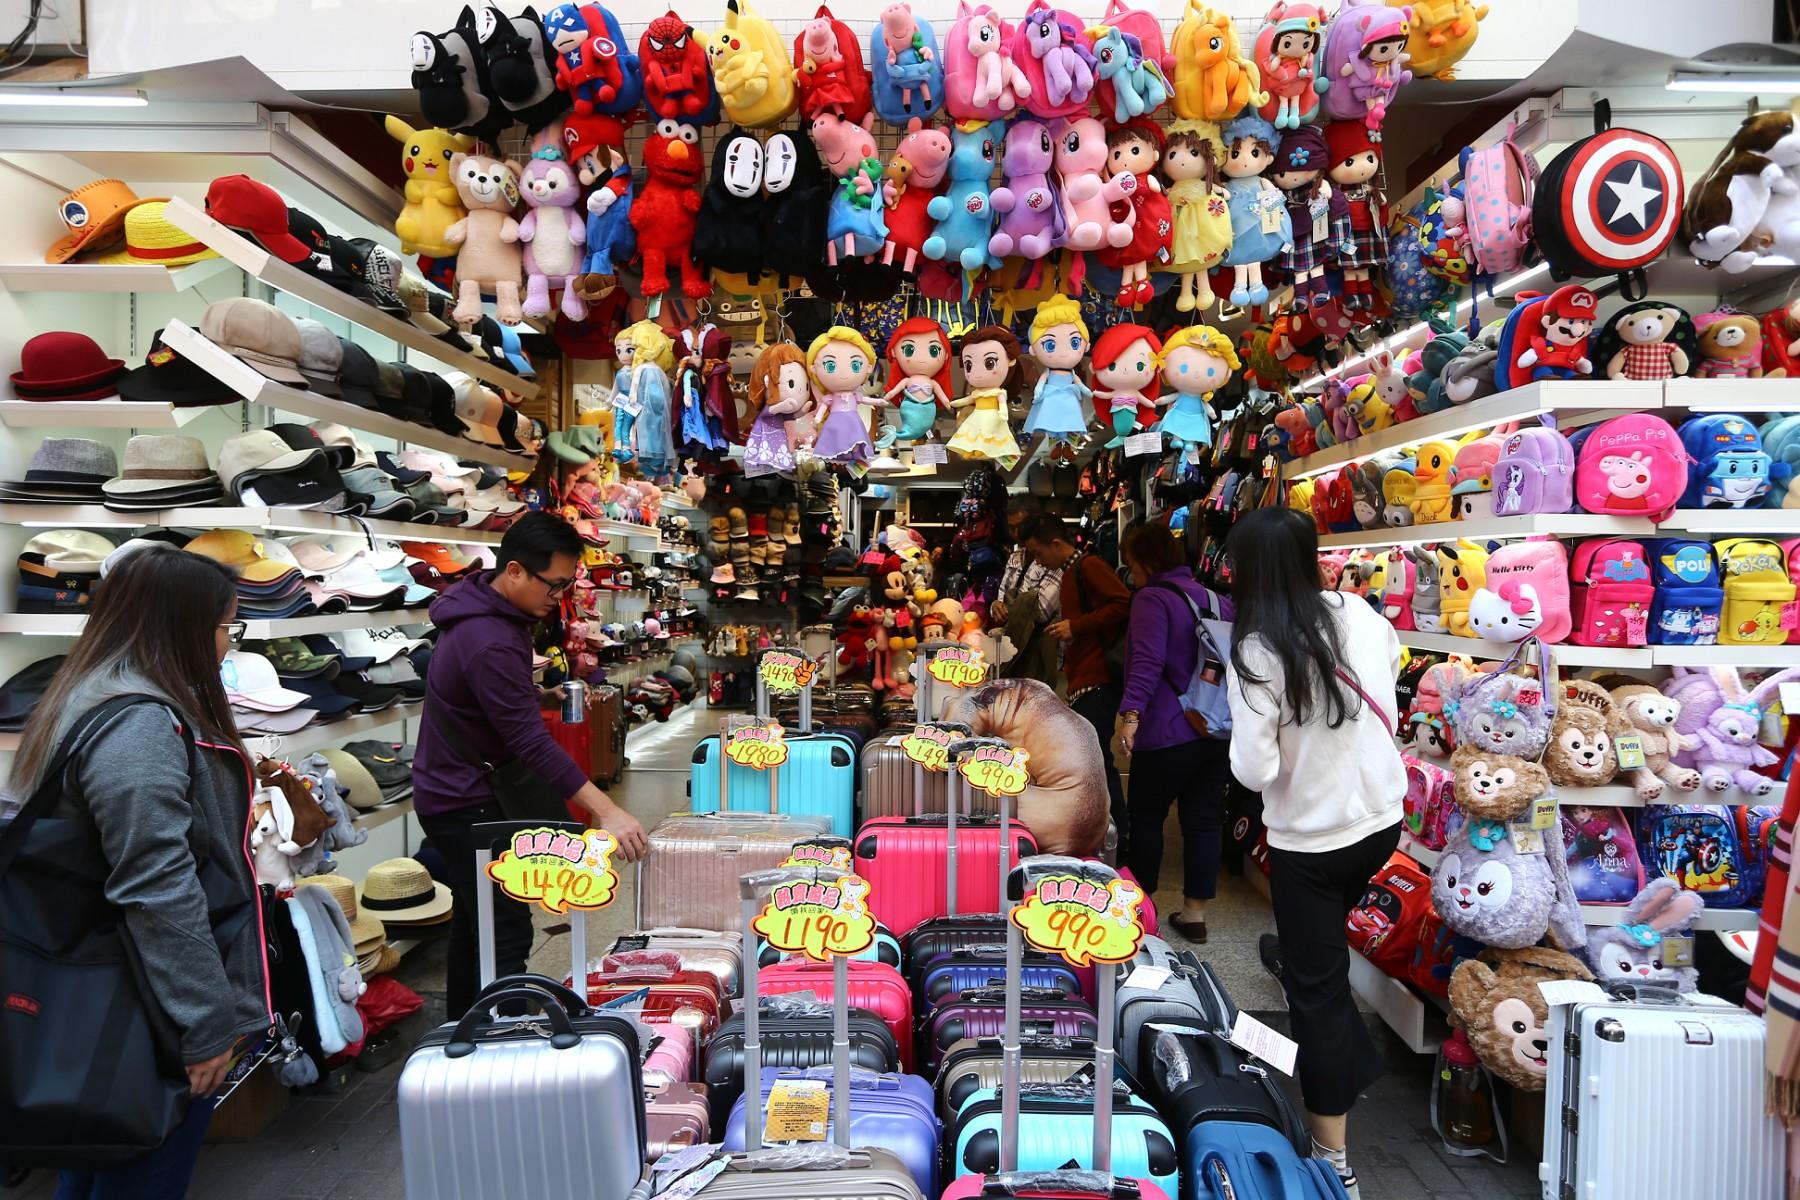 Shoppers take a look at various travel cases and cartoon backpacks in Taipei on March 12, 2018. Photo: AFP